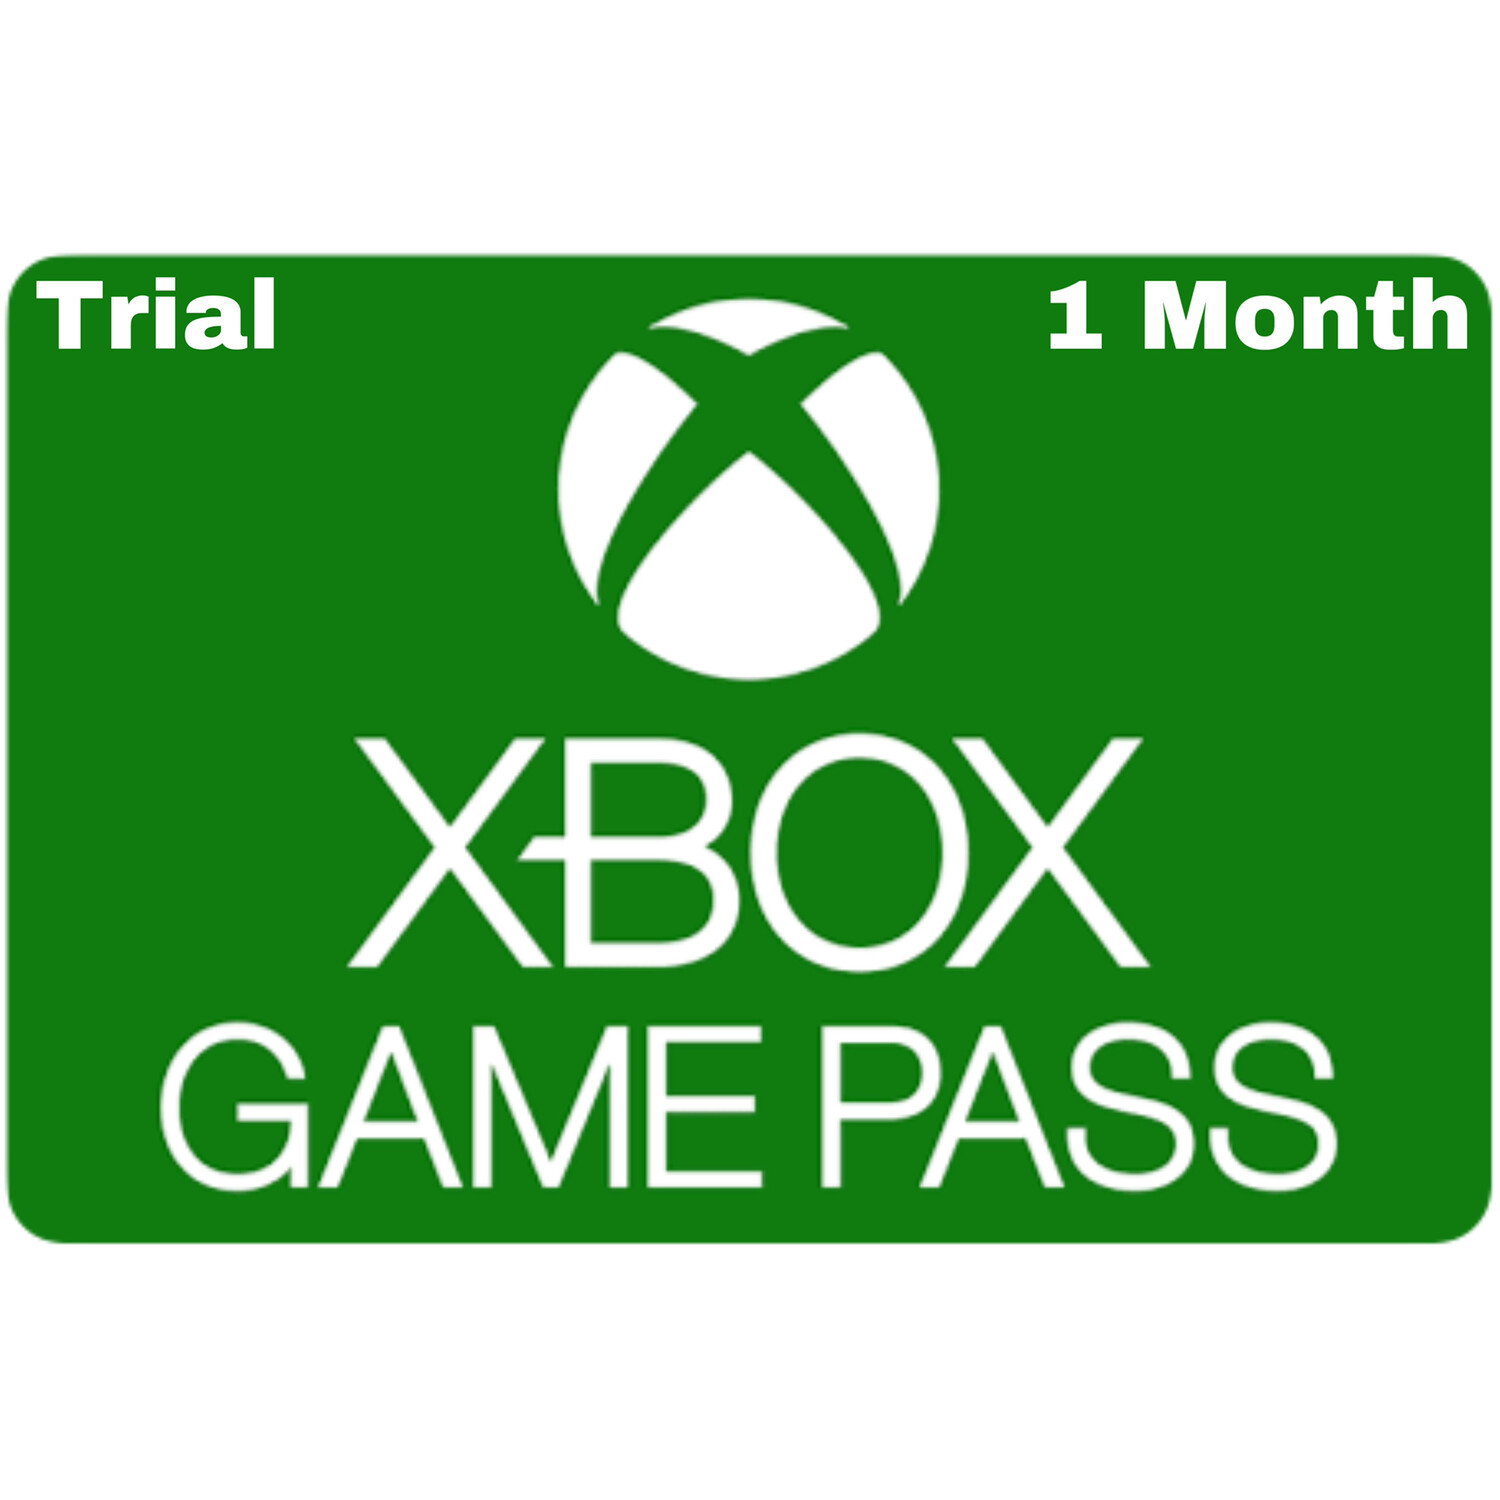 Xbox Game Pass 1 Month Trial Membership